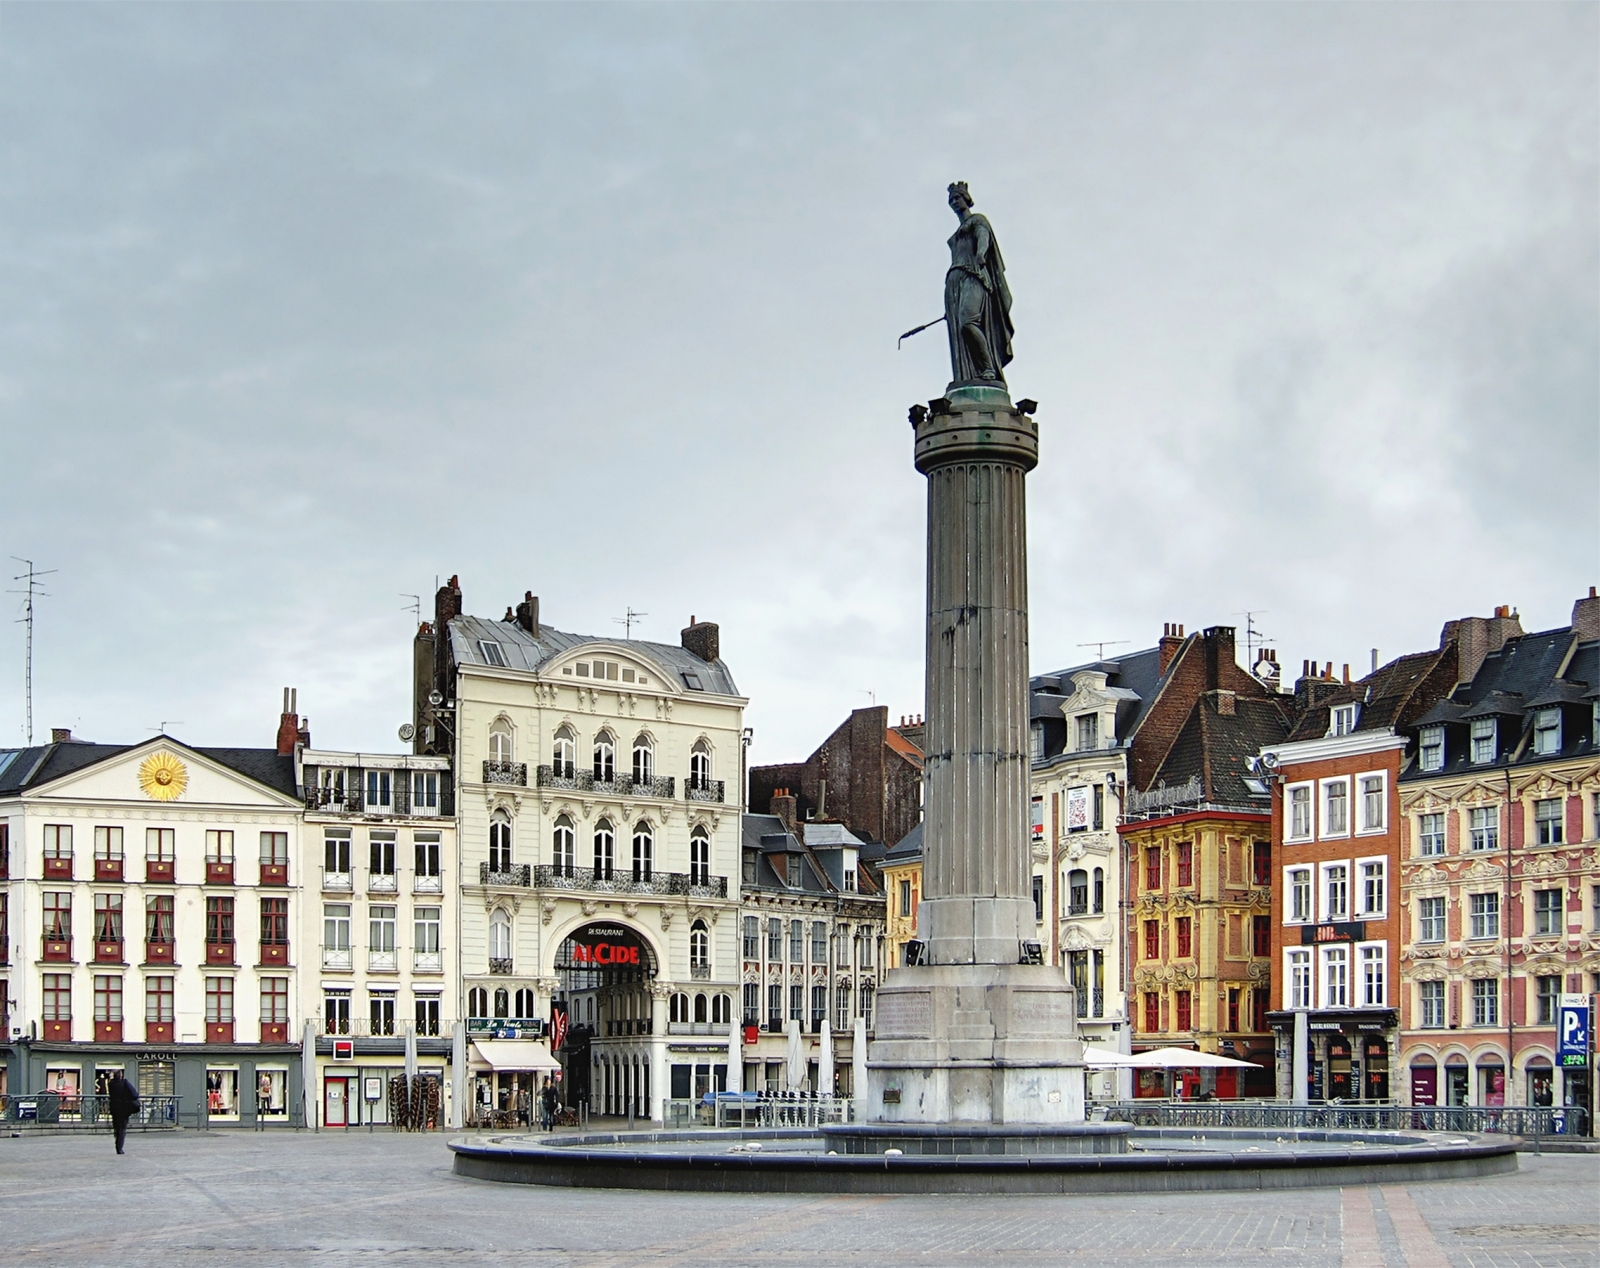 Lille: From left-wing bastion to far-right hunting ground | IBTimes UK